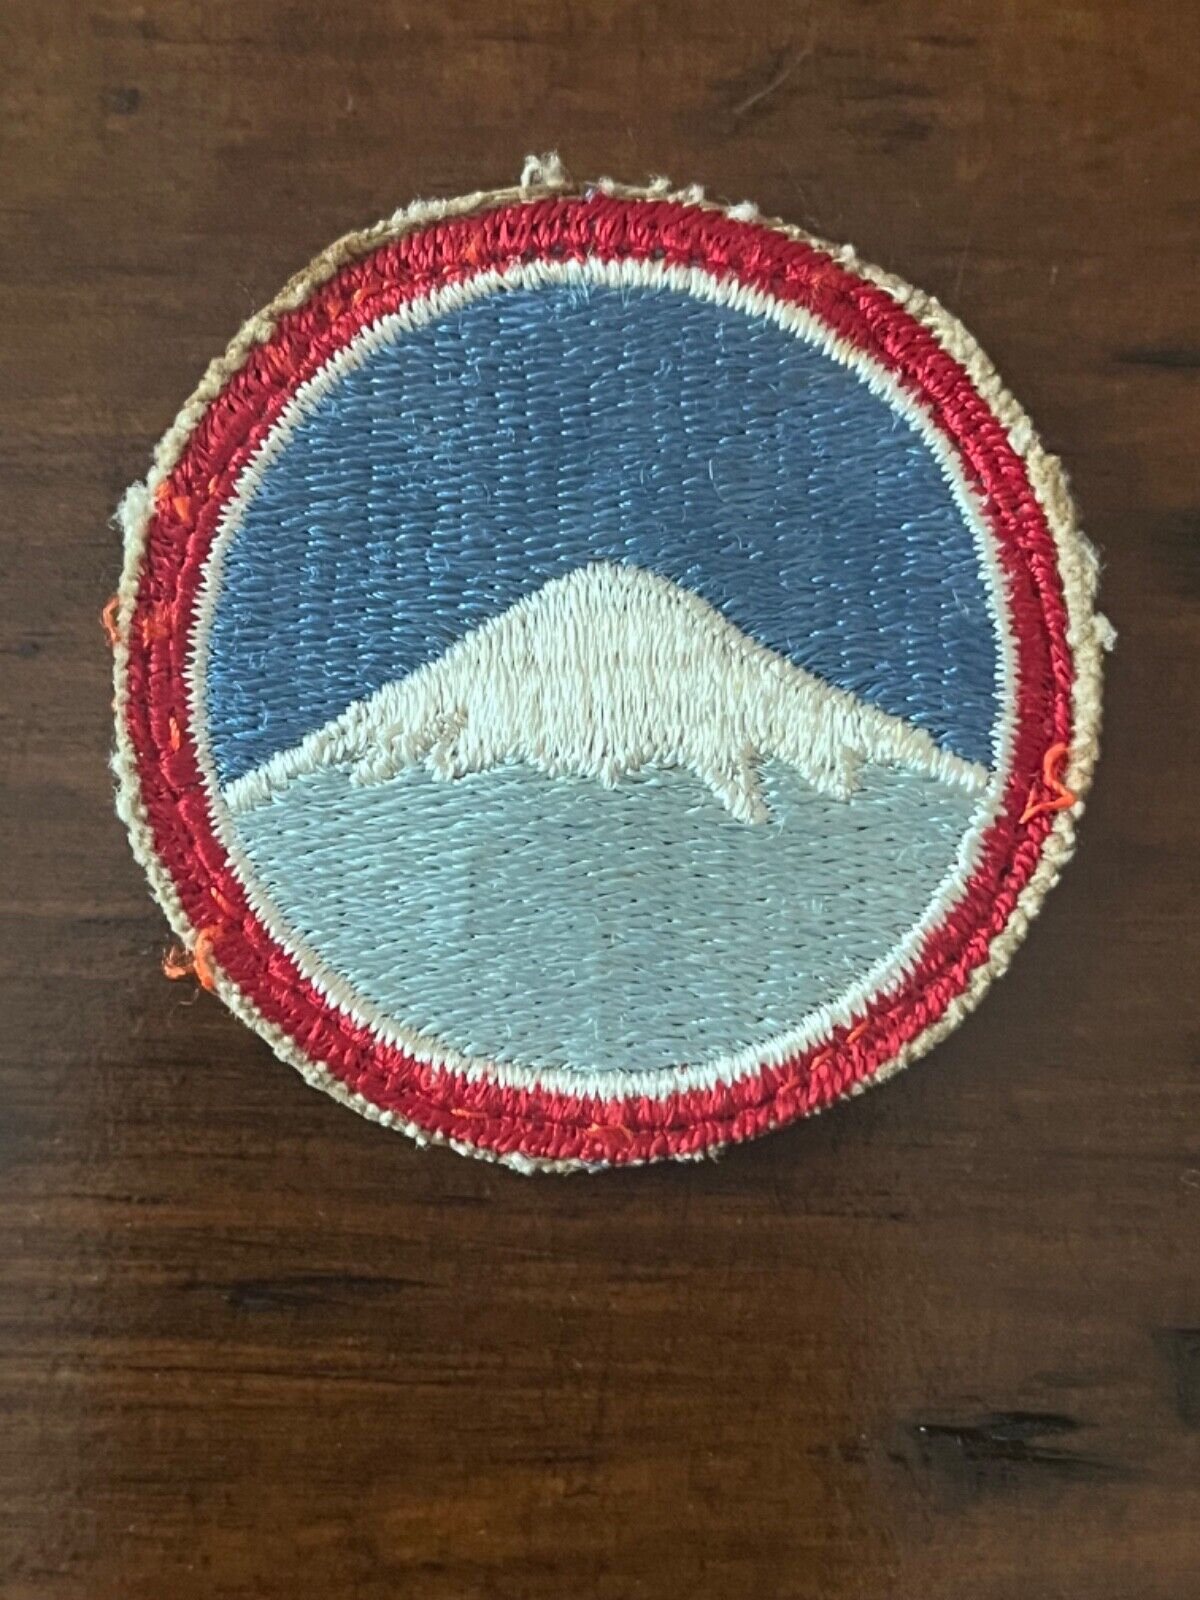 ORIGINAL PERIOD WWII WW2 US ARMY FORCES FAR EAST COMMAND JAPAN MT FUJI PATCH